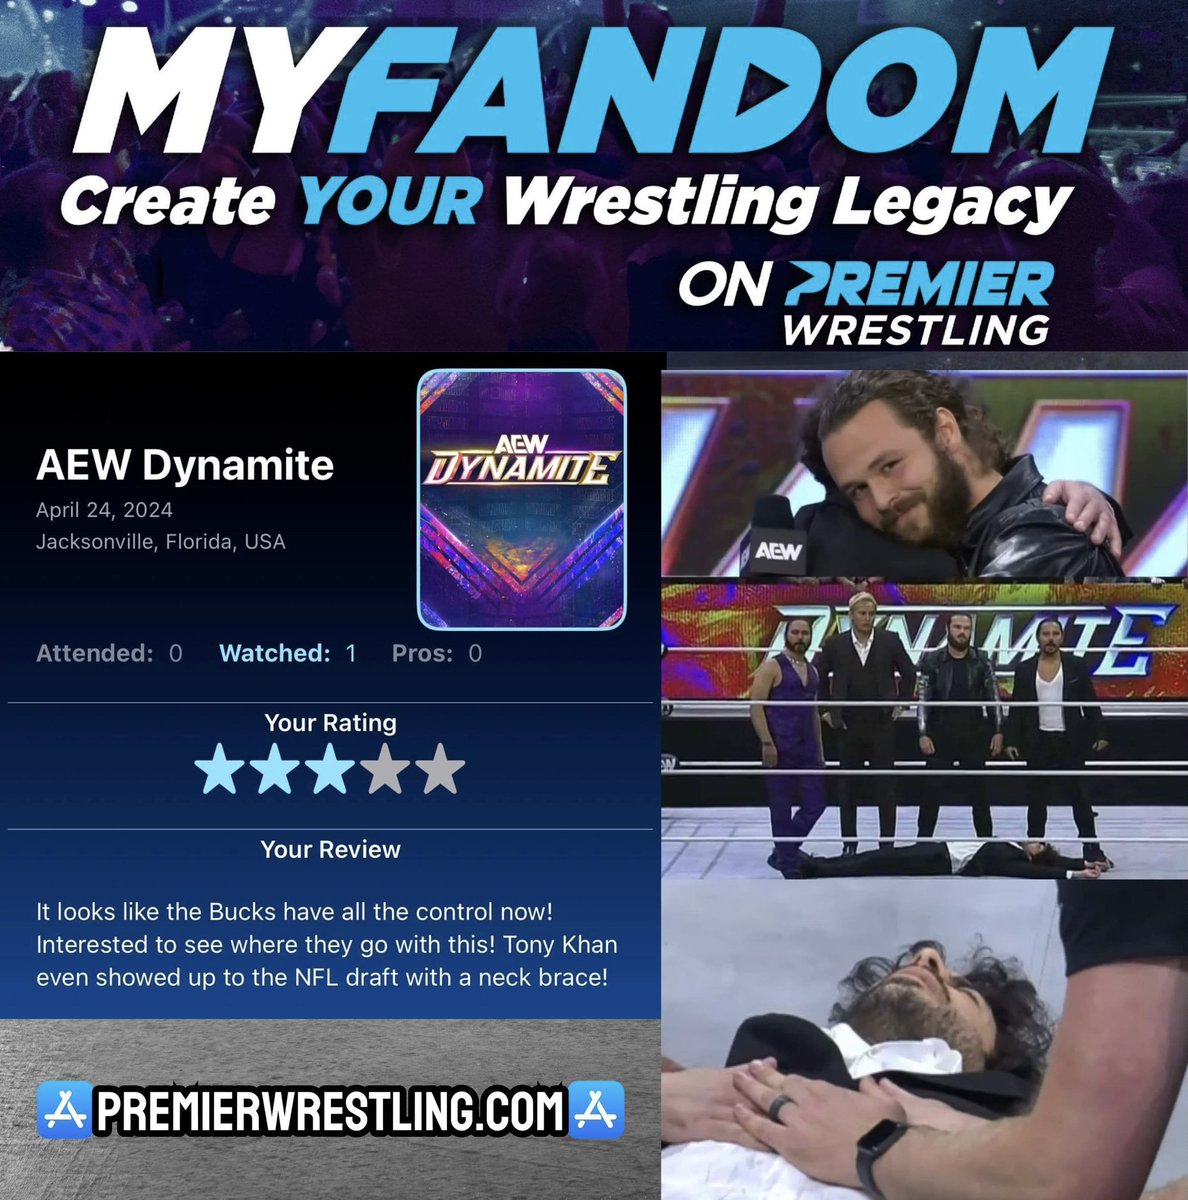 Did you see the chaos that went down on AEW Dynamite?! Tony Khan got taken out by Jack Perry & The Elite! What would you rate AEW Dynamite from this week? Here's your chance! Go to #MyFandom, Add this past week's event to 'WATCHED' and leave your review and tell the world what